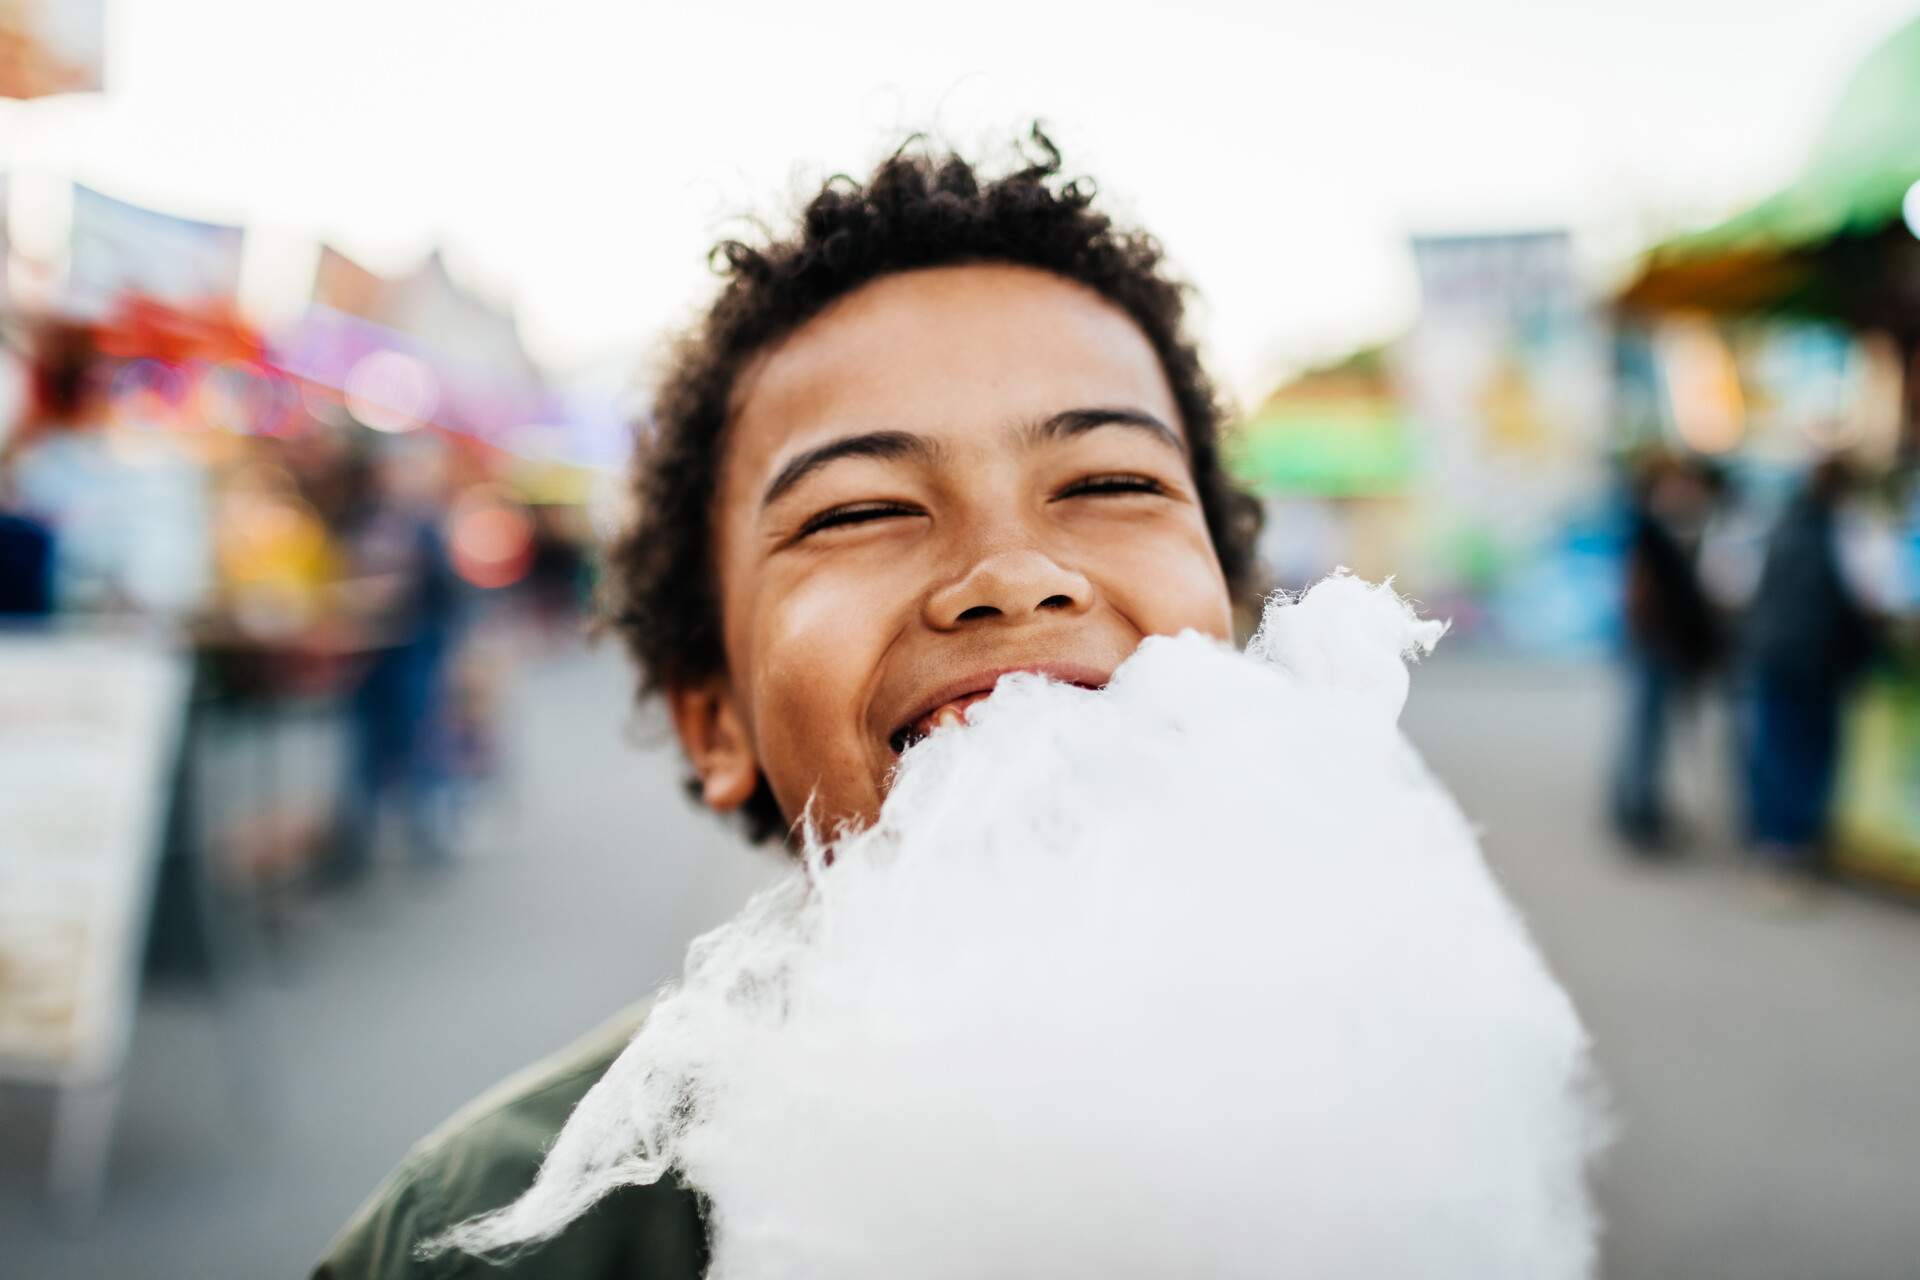 A kid with dark hair is smiling and eating a cotton candy